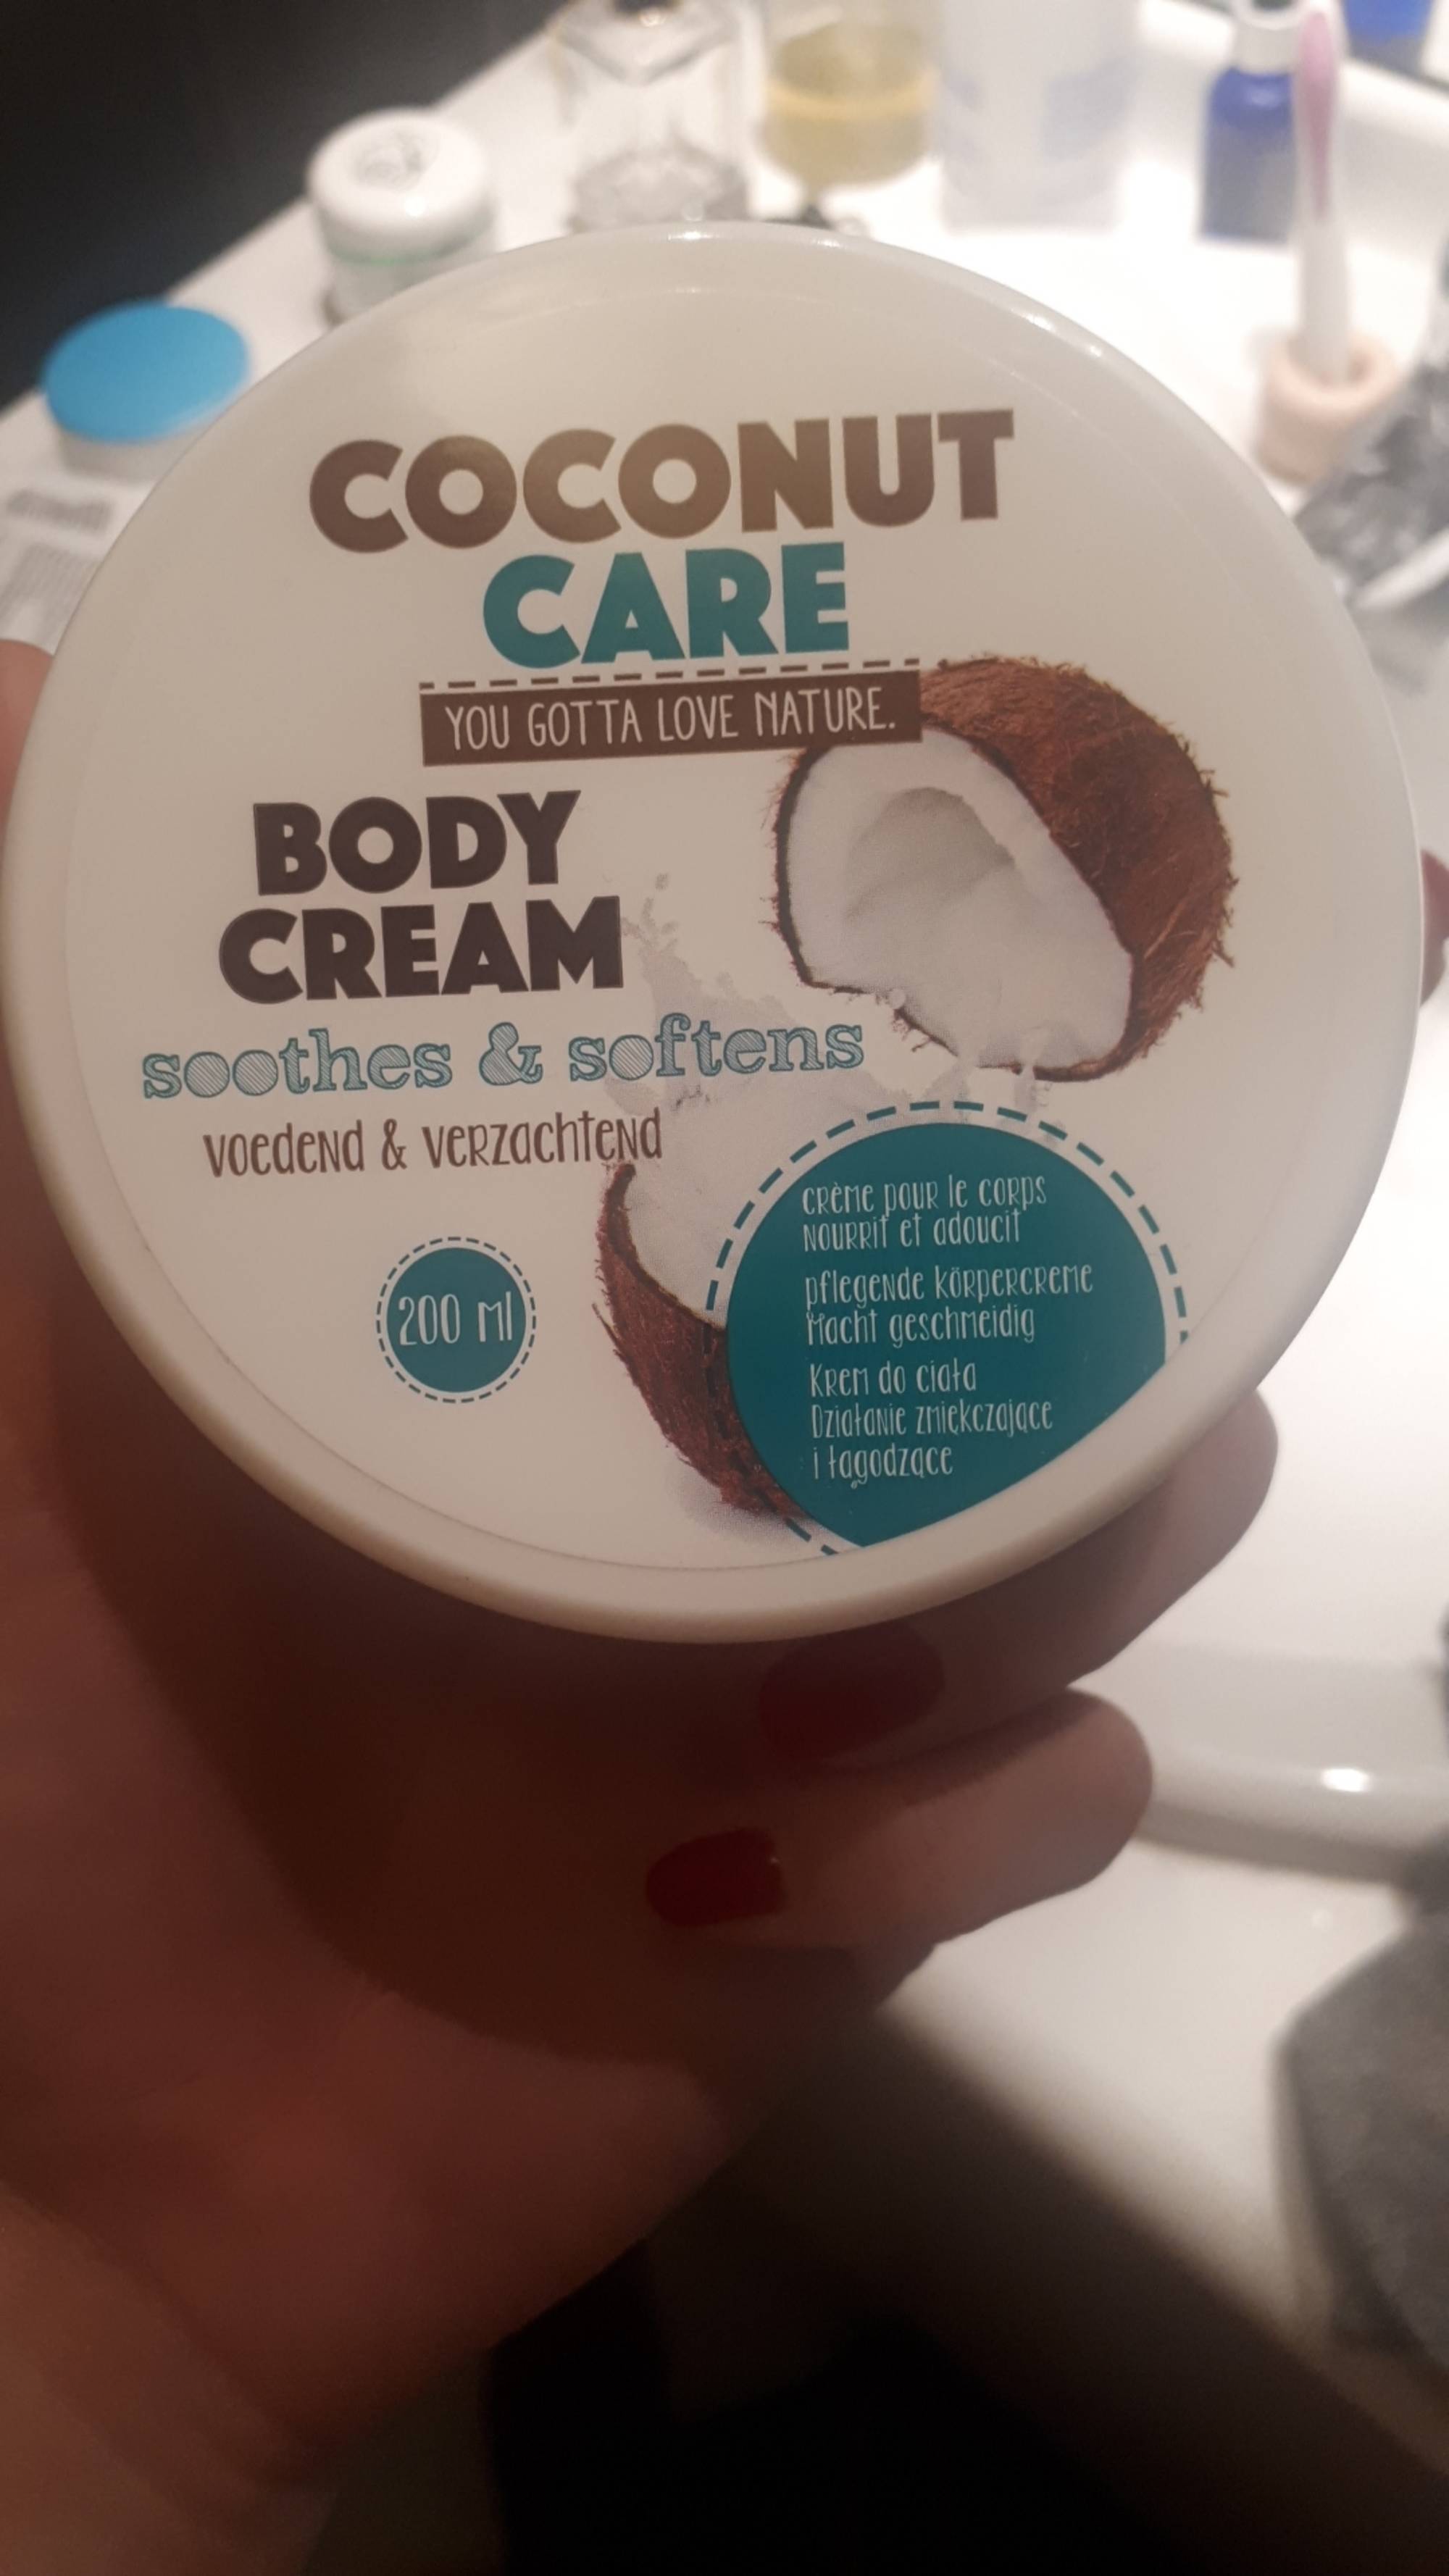 MAXBRANDS - Coconut care - Body cream soothes & softens